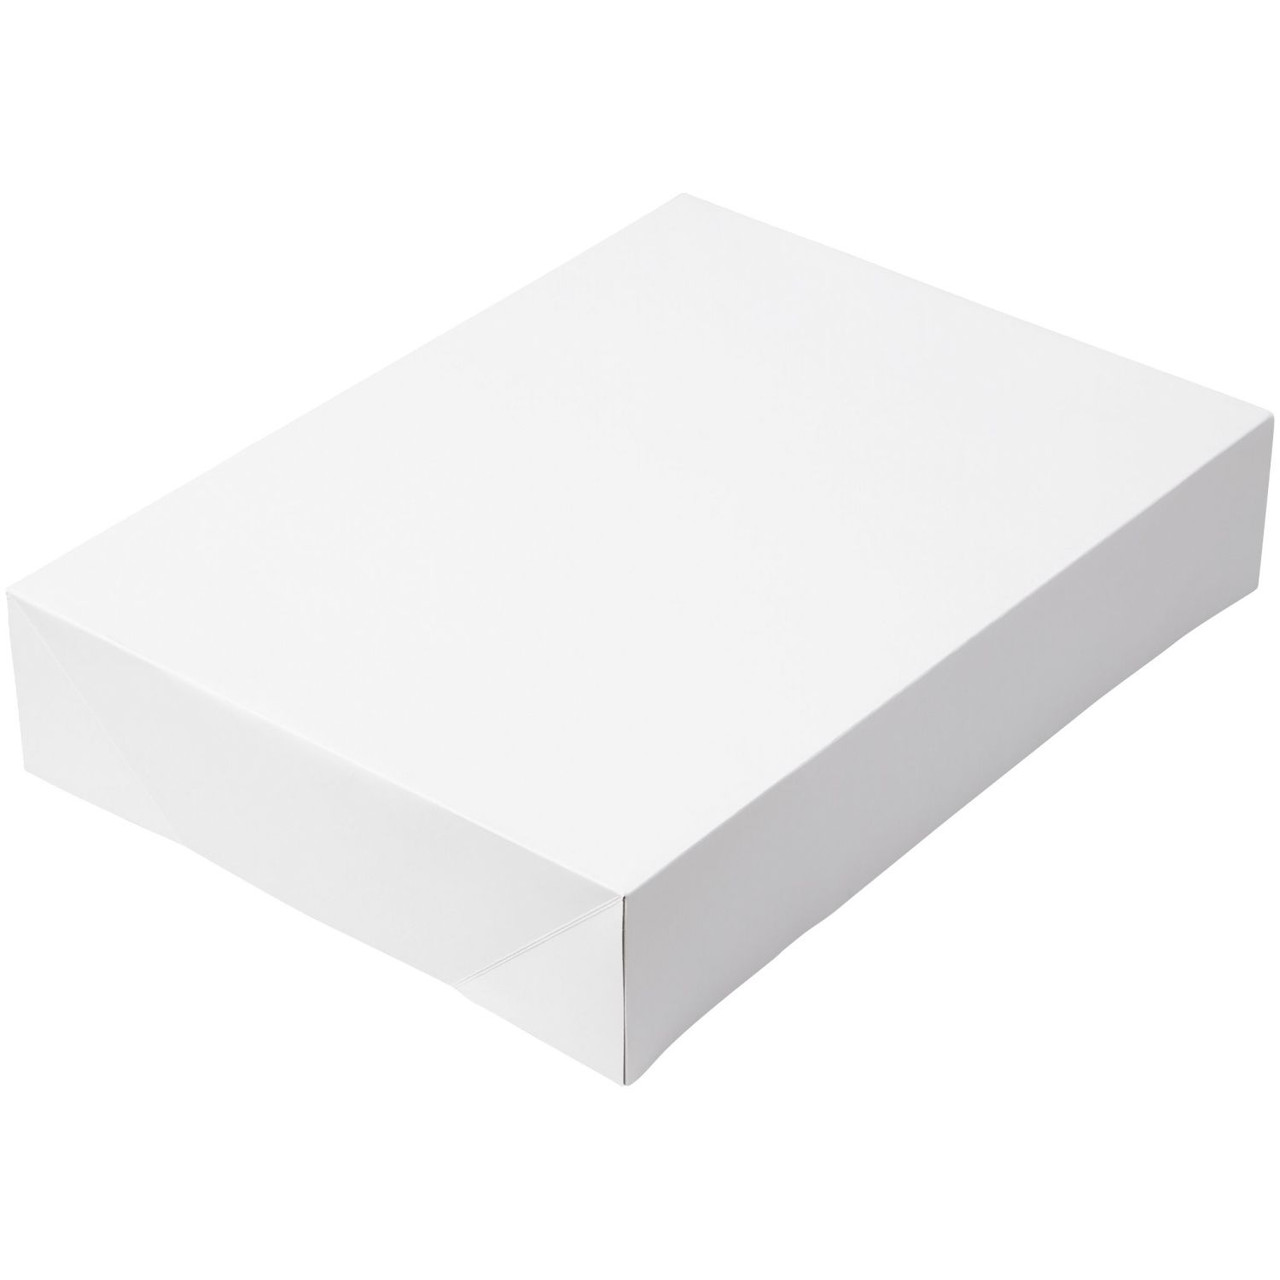 2 Sets Cardboard Dividers for 18 X 14 X 12 Inch Boxes With 26